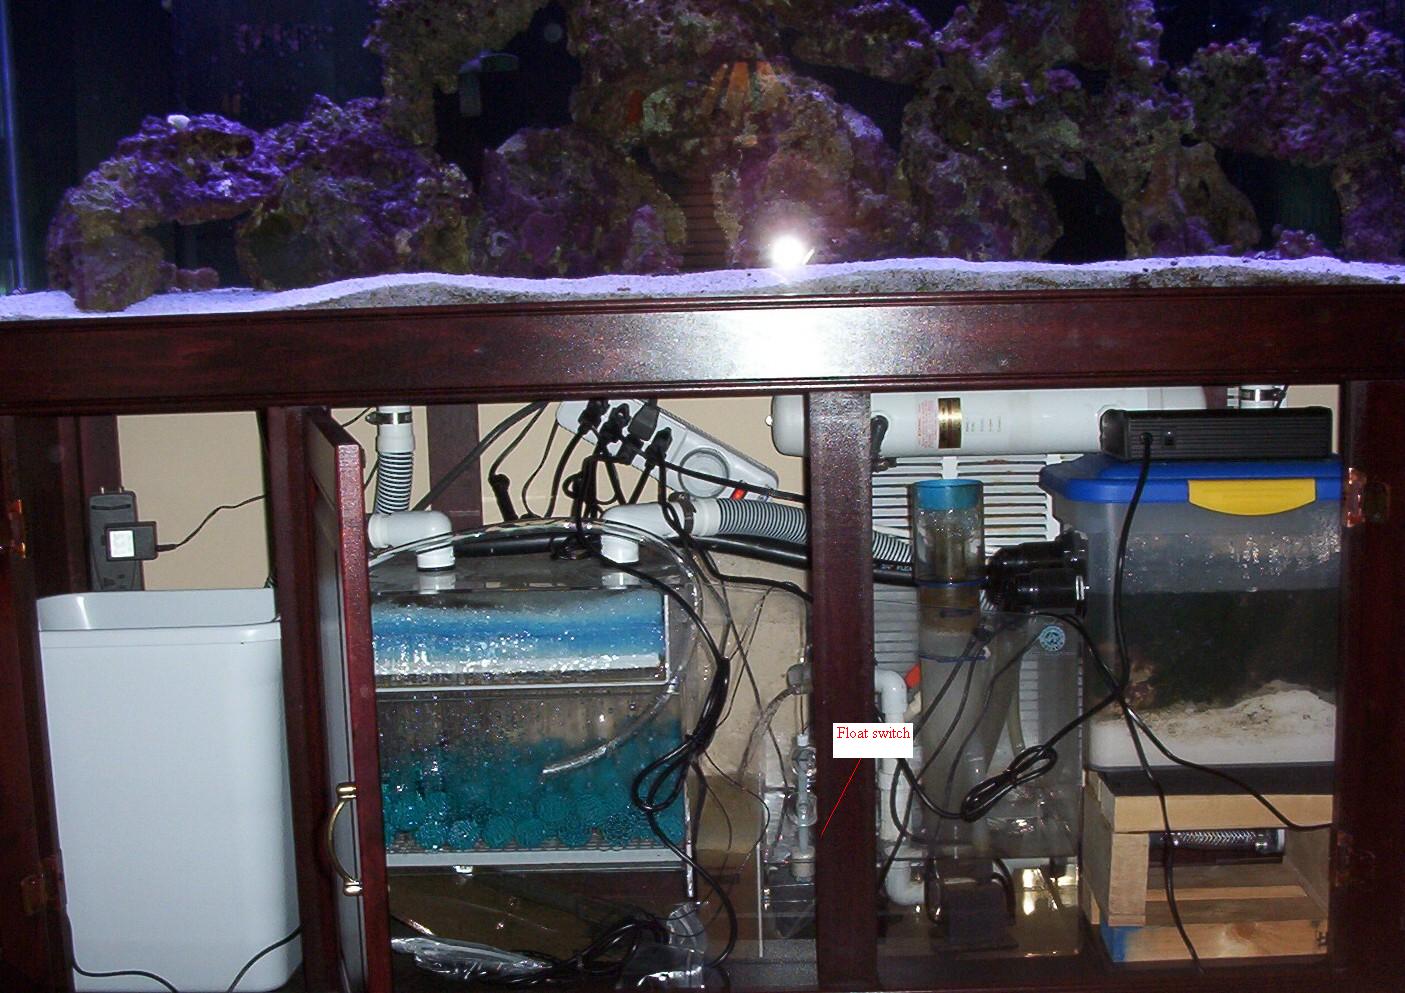 This setup is my first and a bit messy.  I have an auto top off & refugium setup going into my sump.